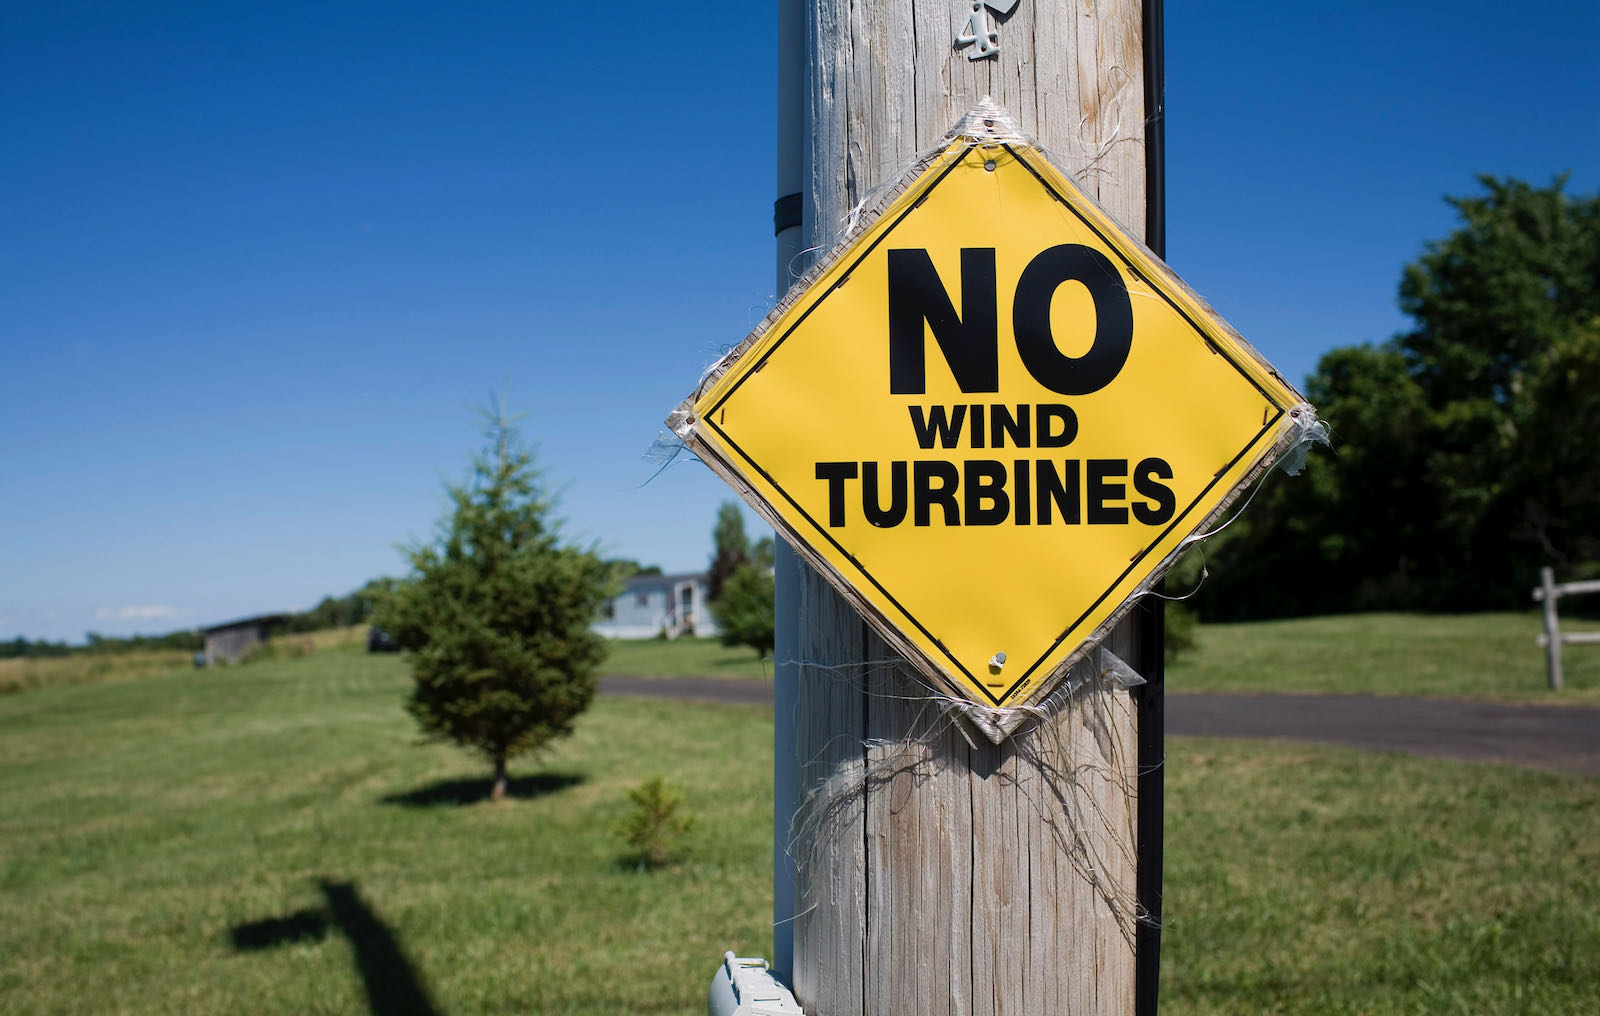 A "no wind turbines" protest sign